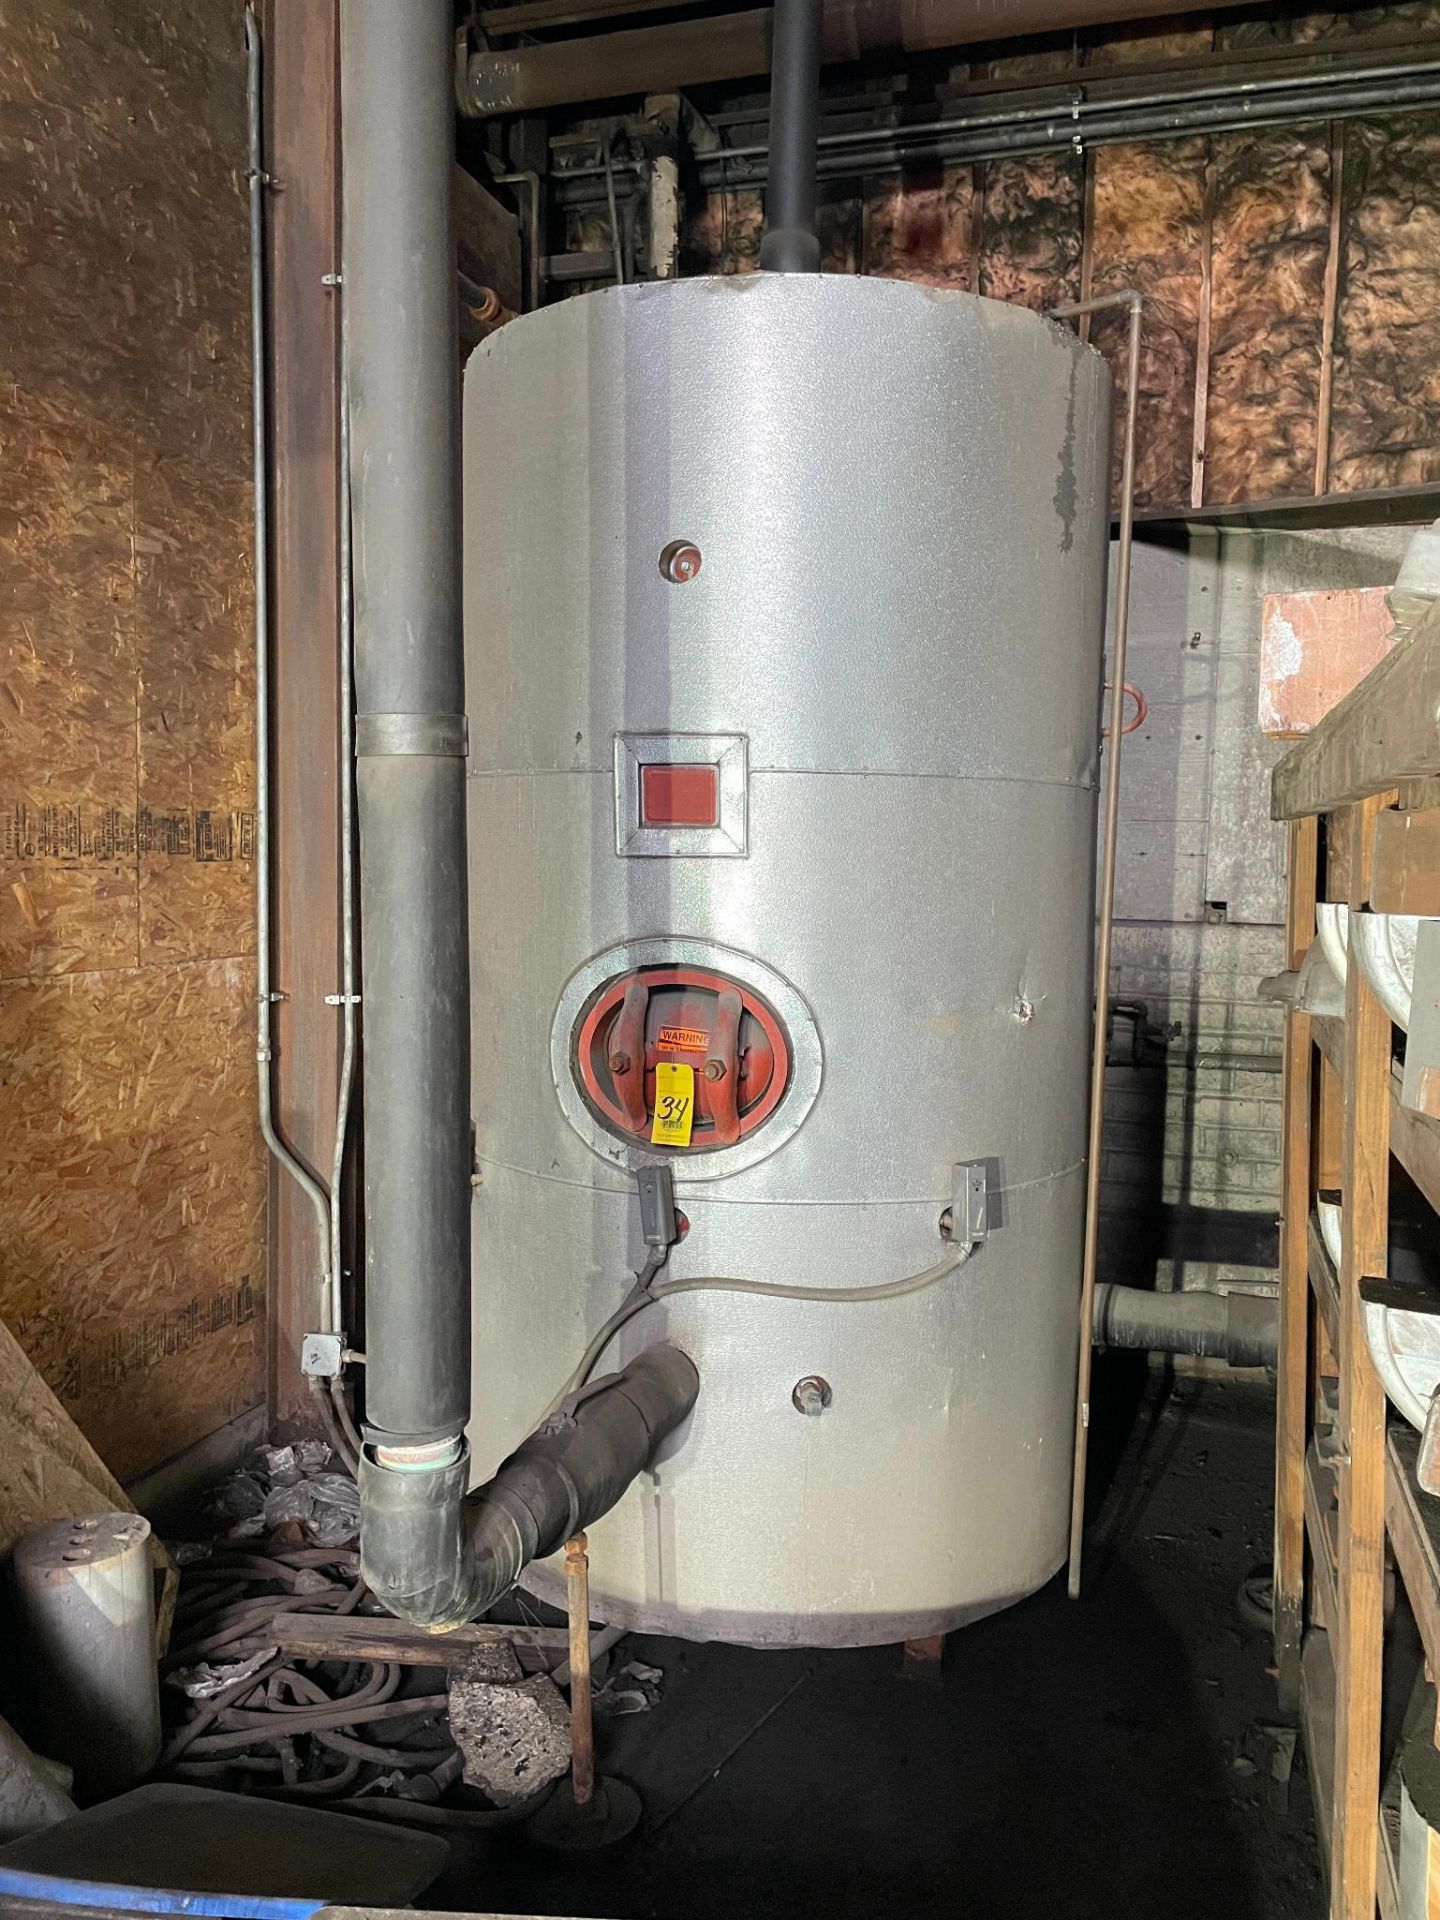 INSULATED HOT WATER HOLDING TANK, approx. 5' x 9', 922 gallons, built 2011, S/N 4411295